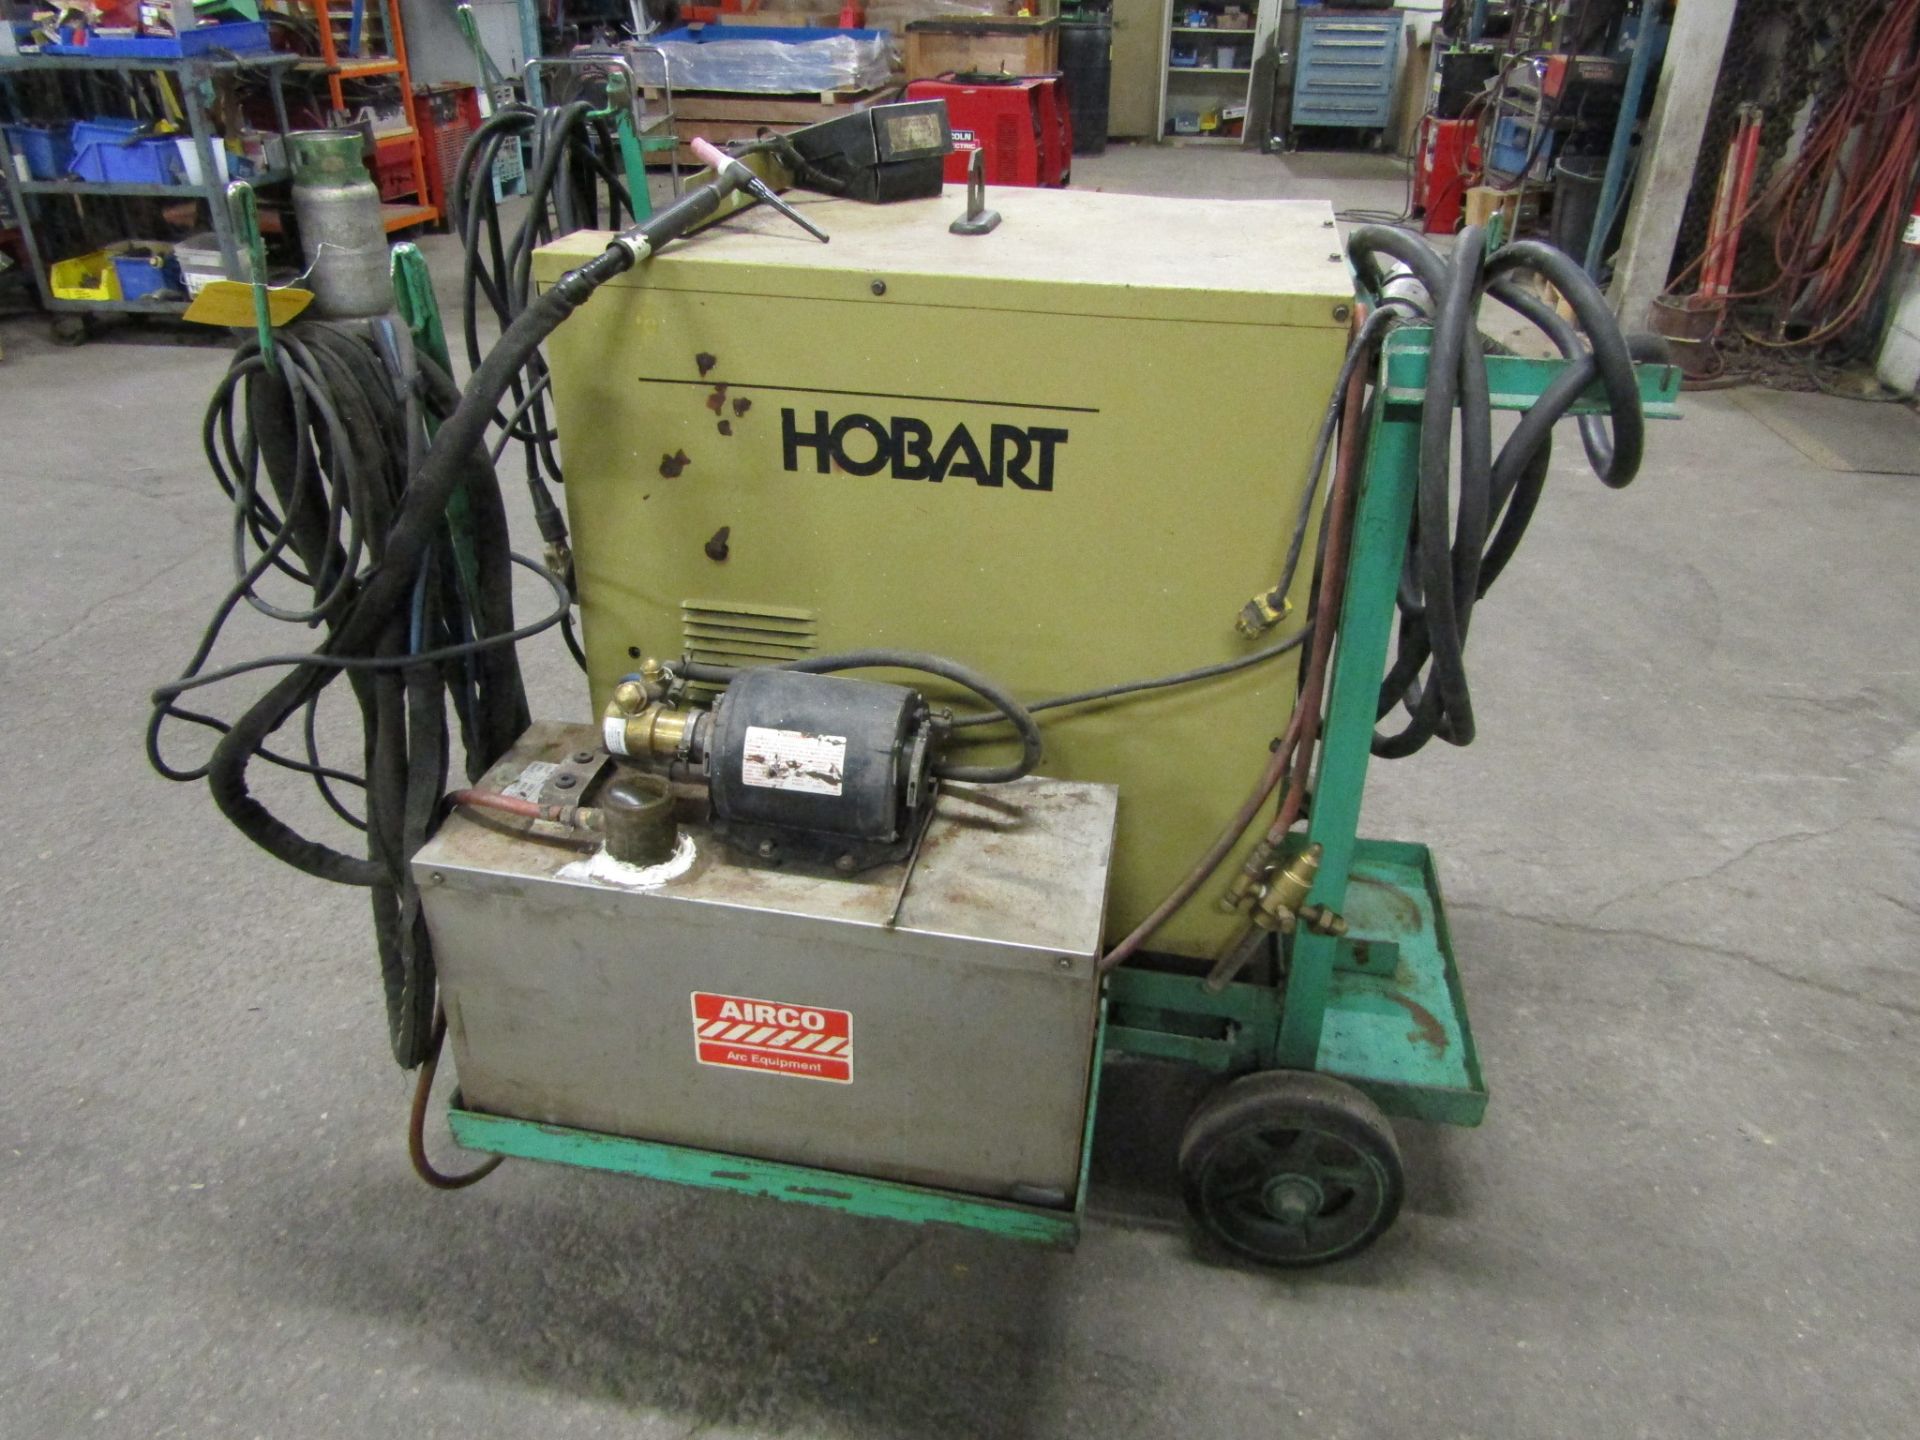 Hobart Tigwave 350 AC/DC Tig Welder 350 Amp with gun, cables and cart and water cooler - Image 2 of 2